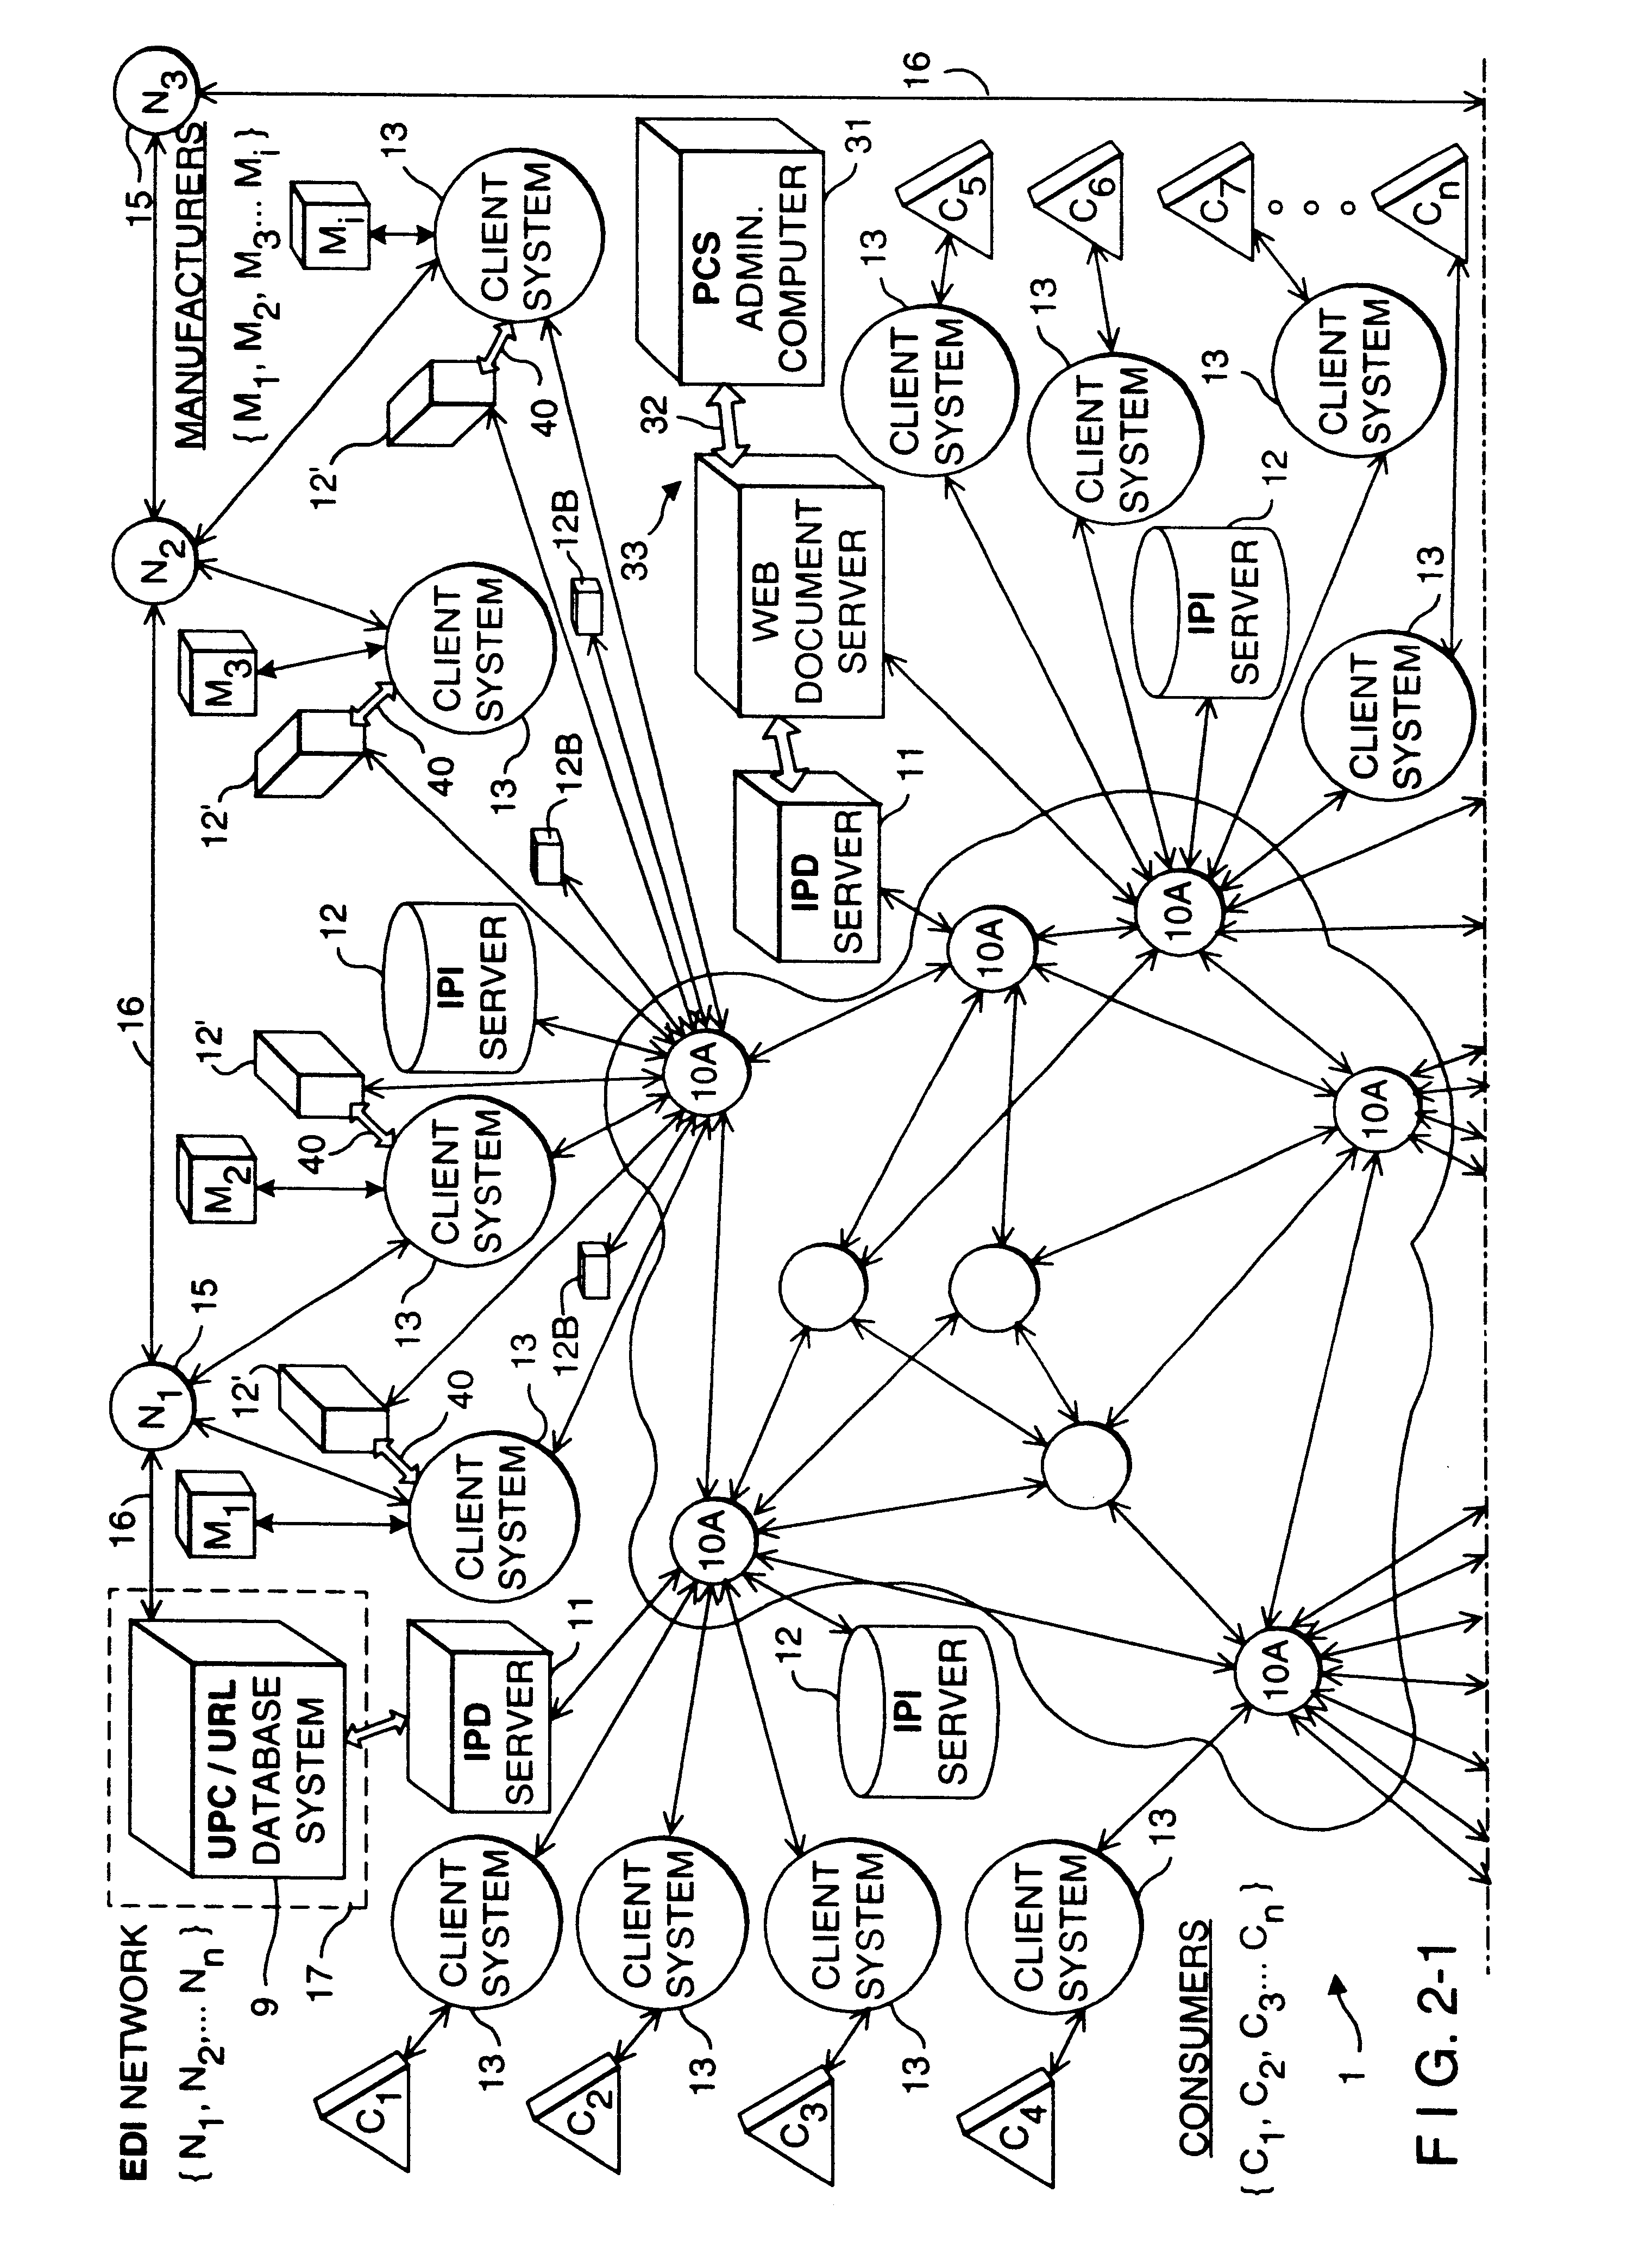 Method of and system for enabling the access of consumer product related information and the purchase of consumer products at points of consumer presence on the world wide web (WWW) at which consumer product information request (CPIR) enabling servlet tags are embedded within html-encoded documents